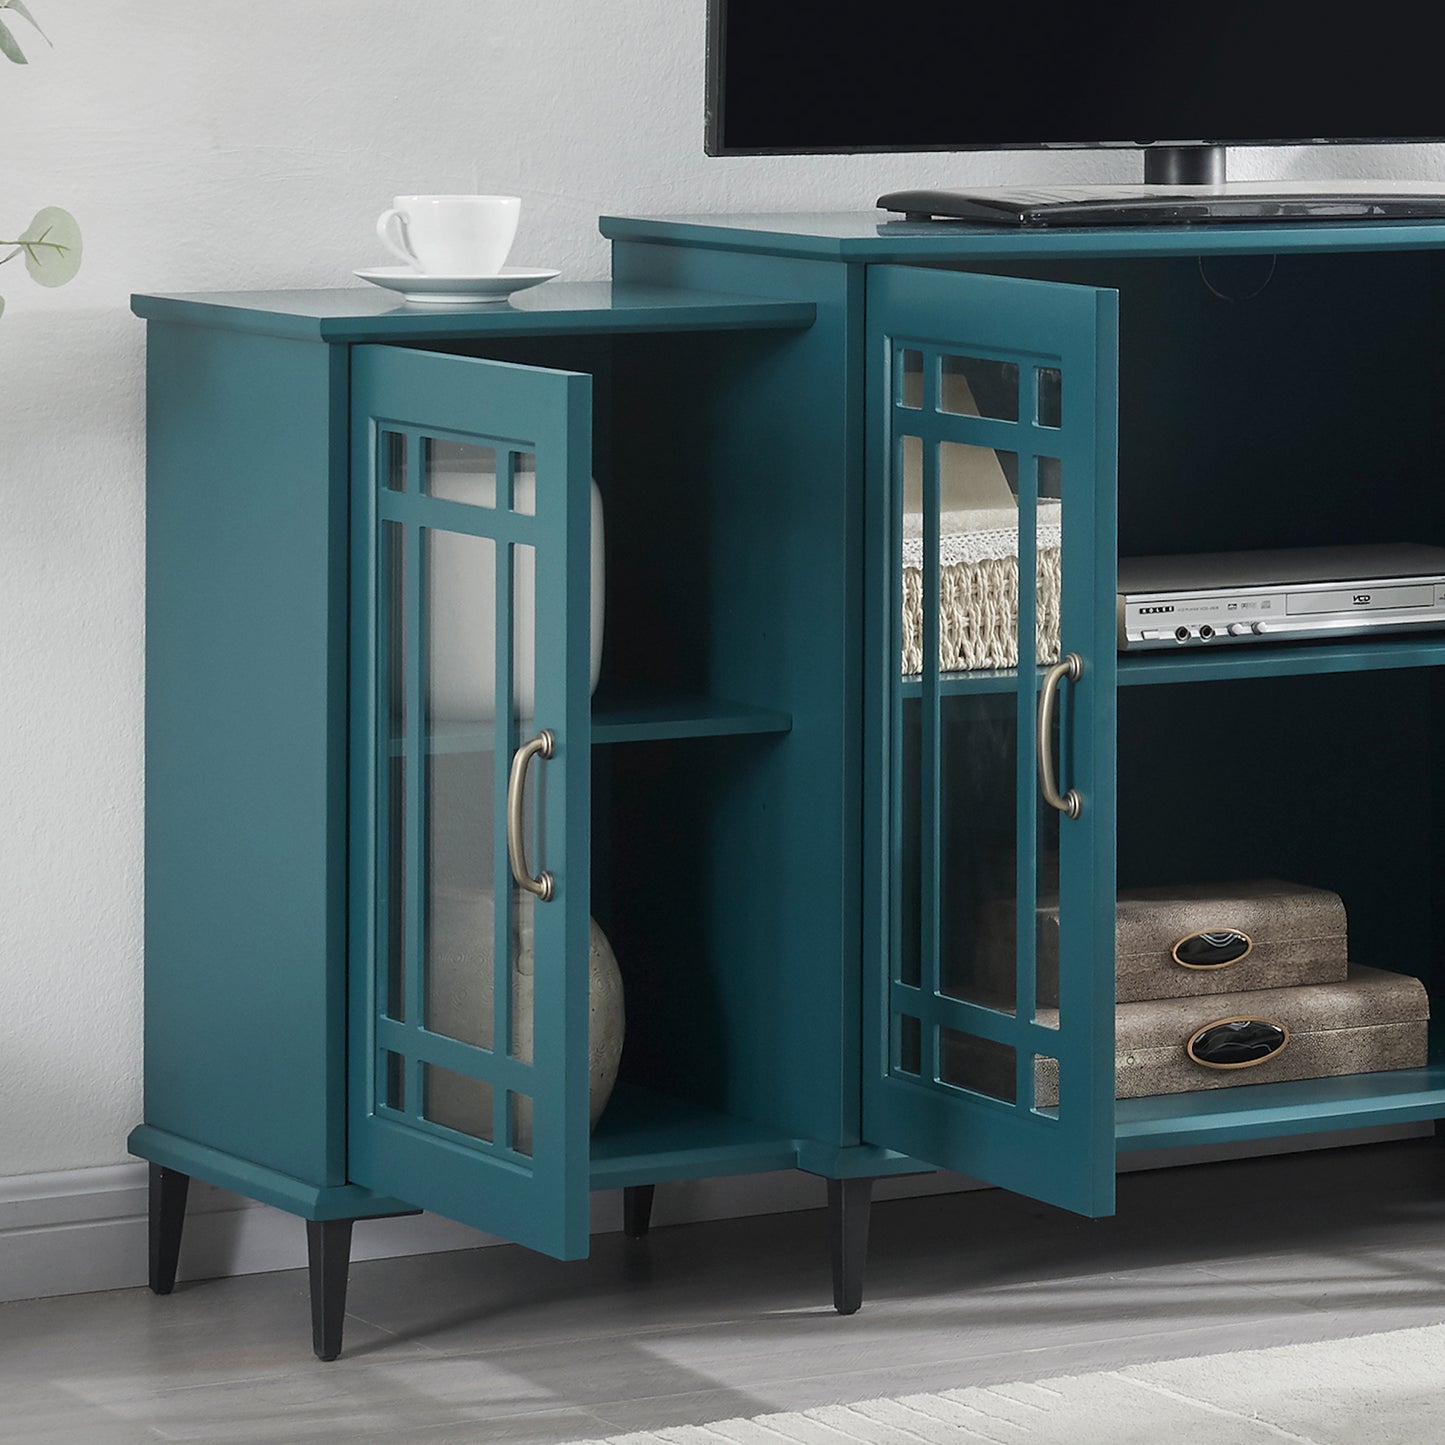 JaydenMax 62" TV Console or Buffet Cabinet - Teal